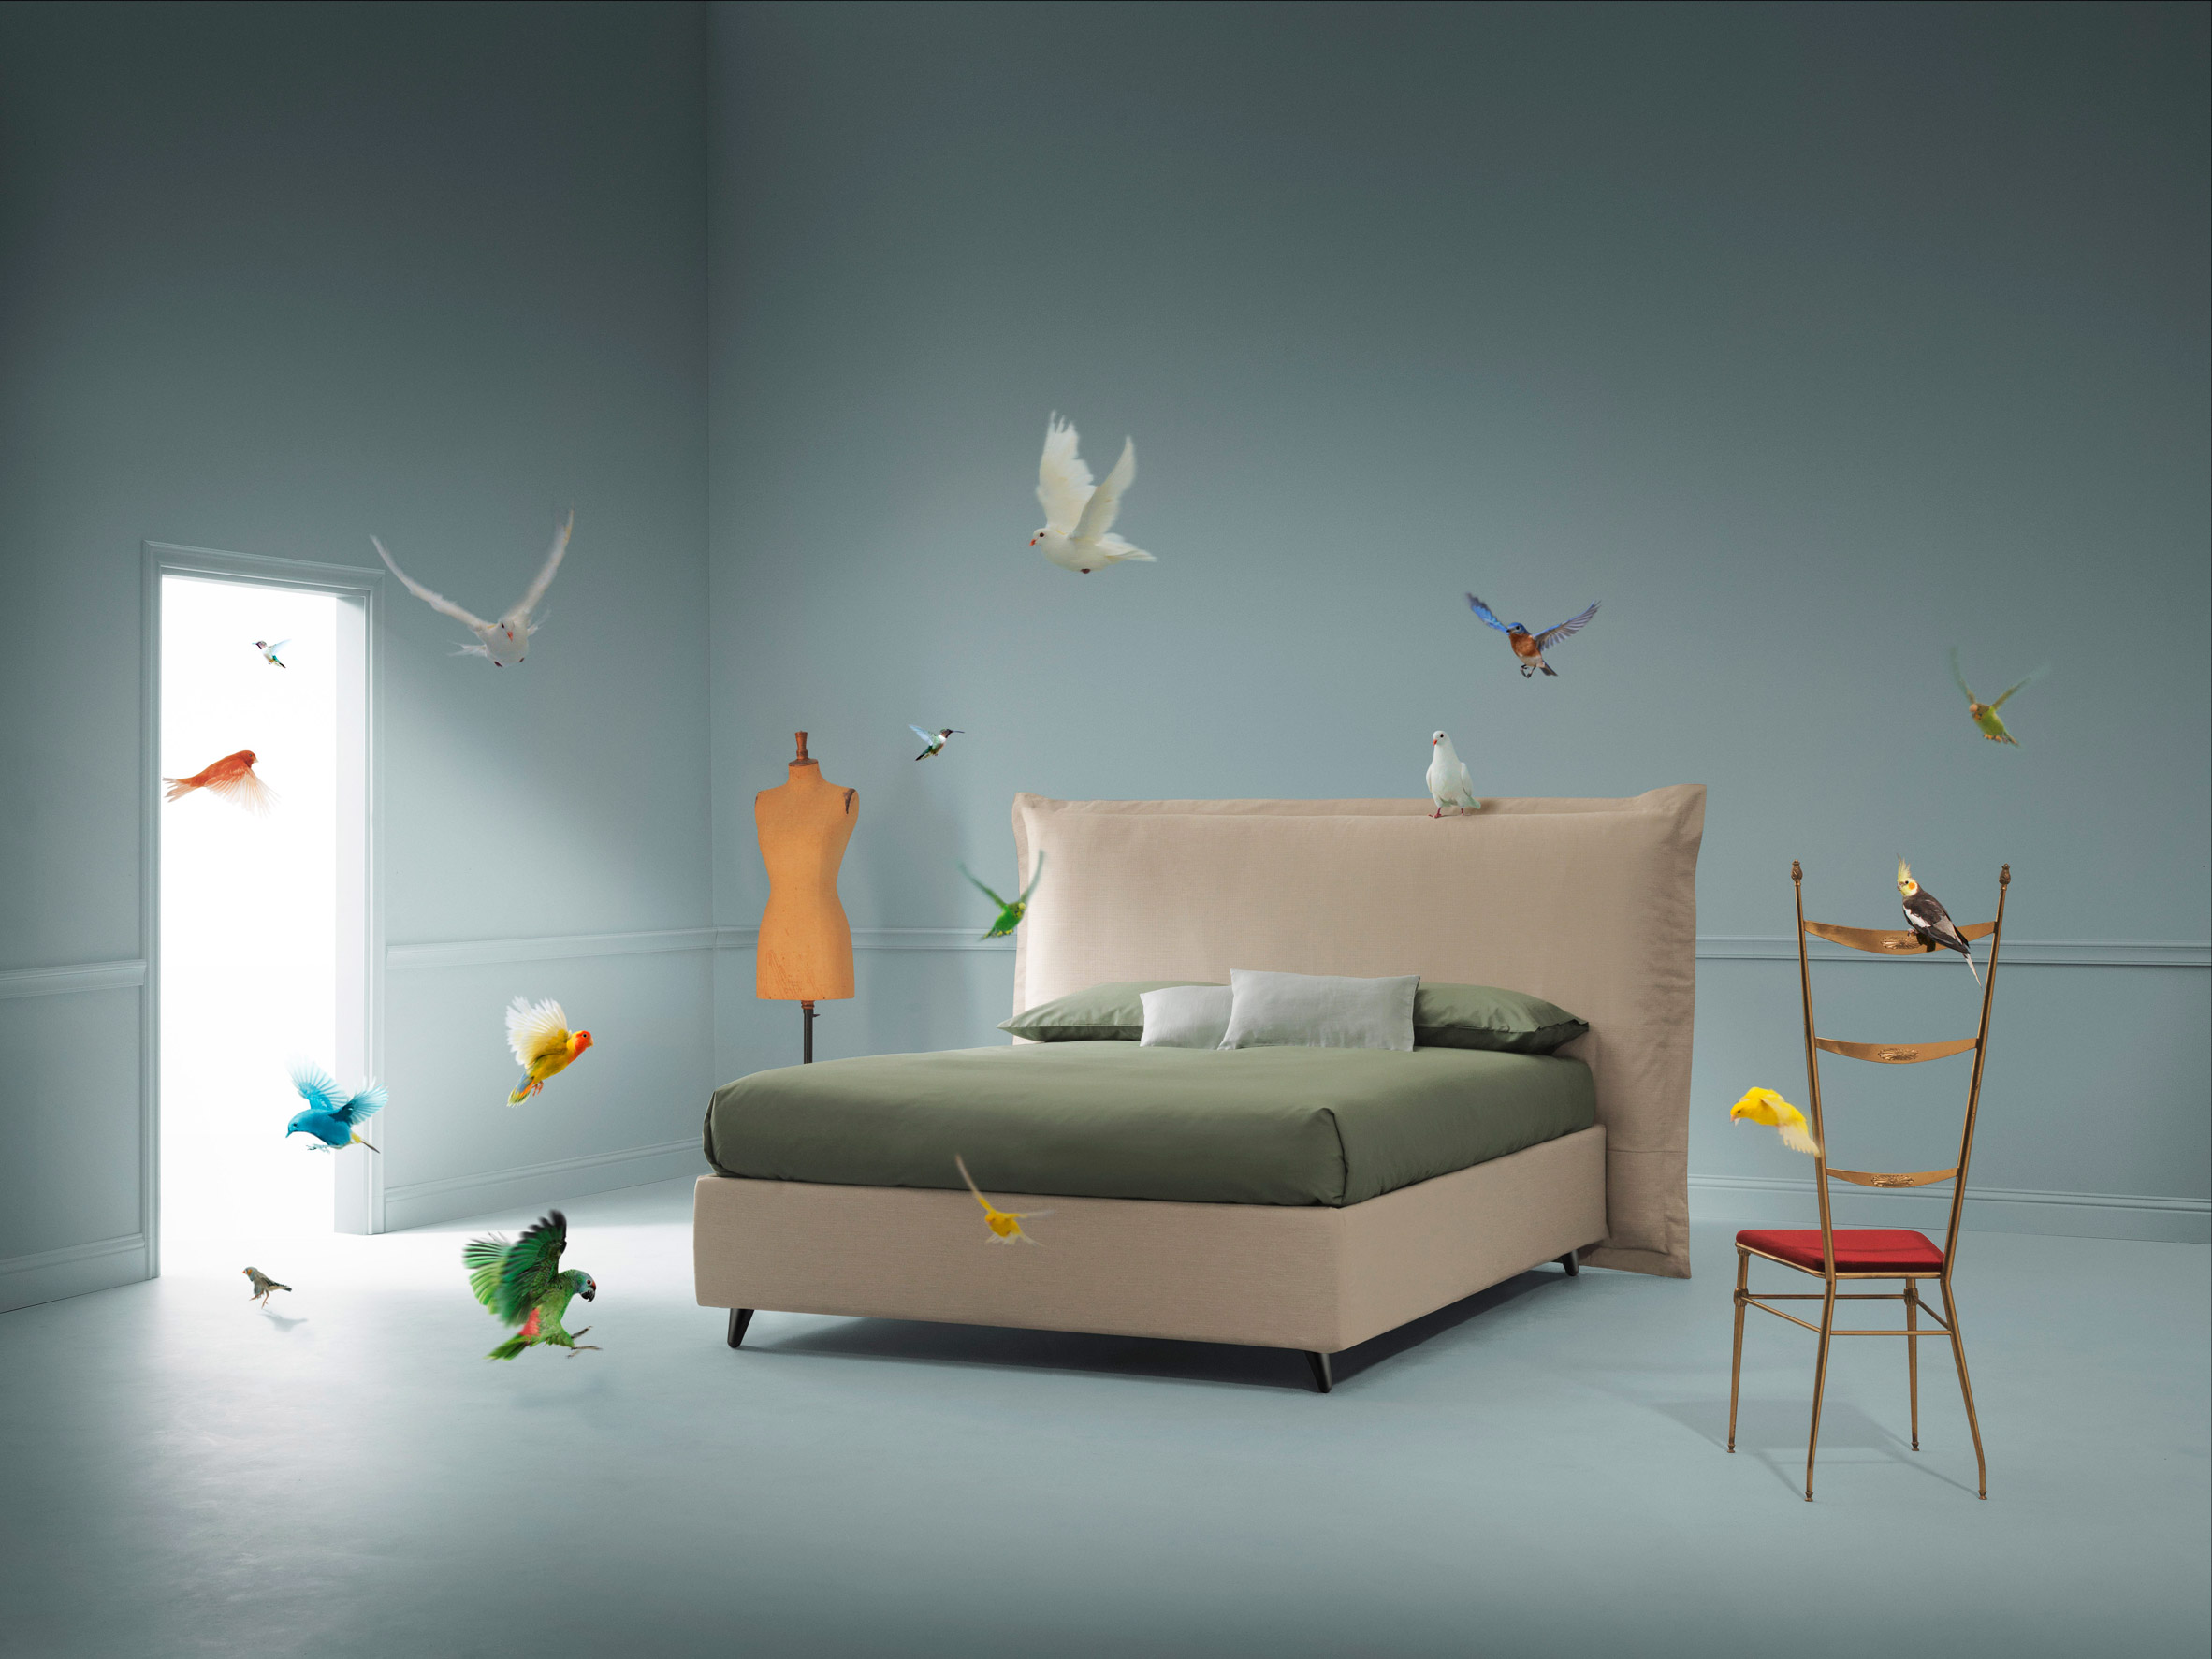 Italian designer Fabio Novembre has collaborated with bed manufacturer PerDormire to create a range of beds influenced by fairytales.